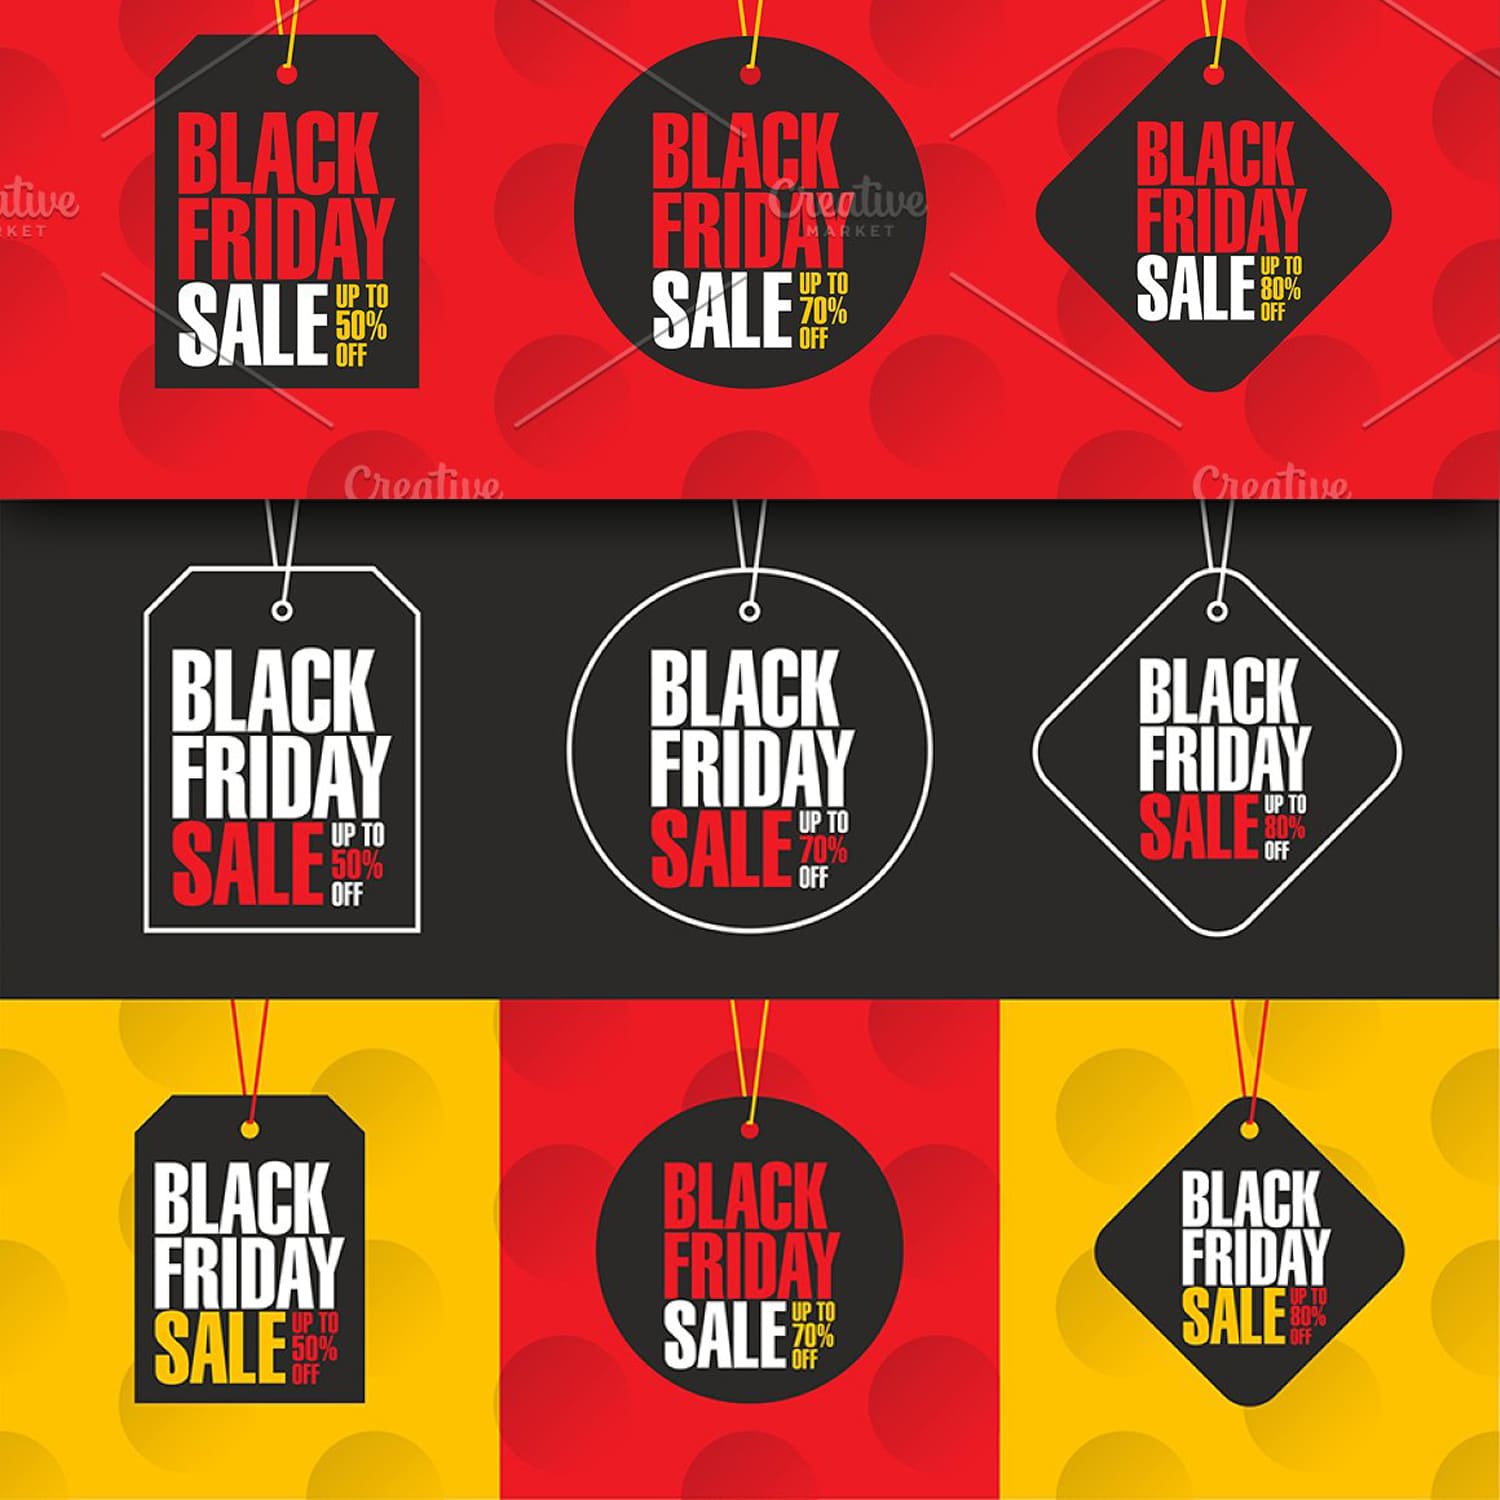 Black Friday Banners.